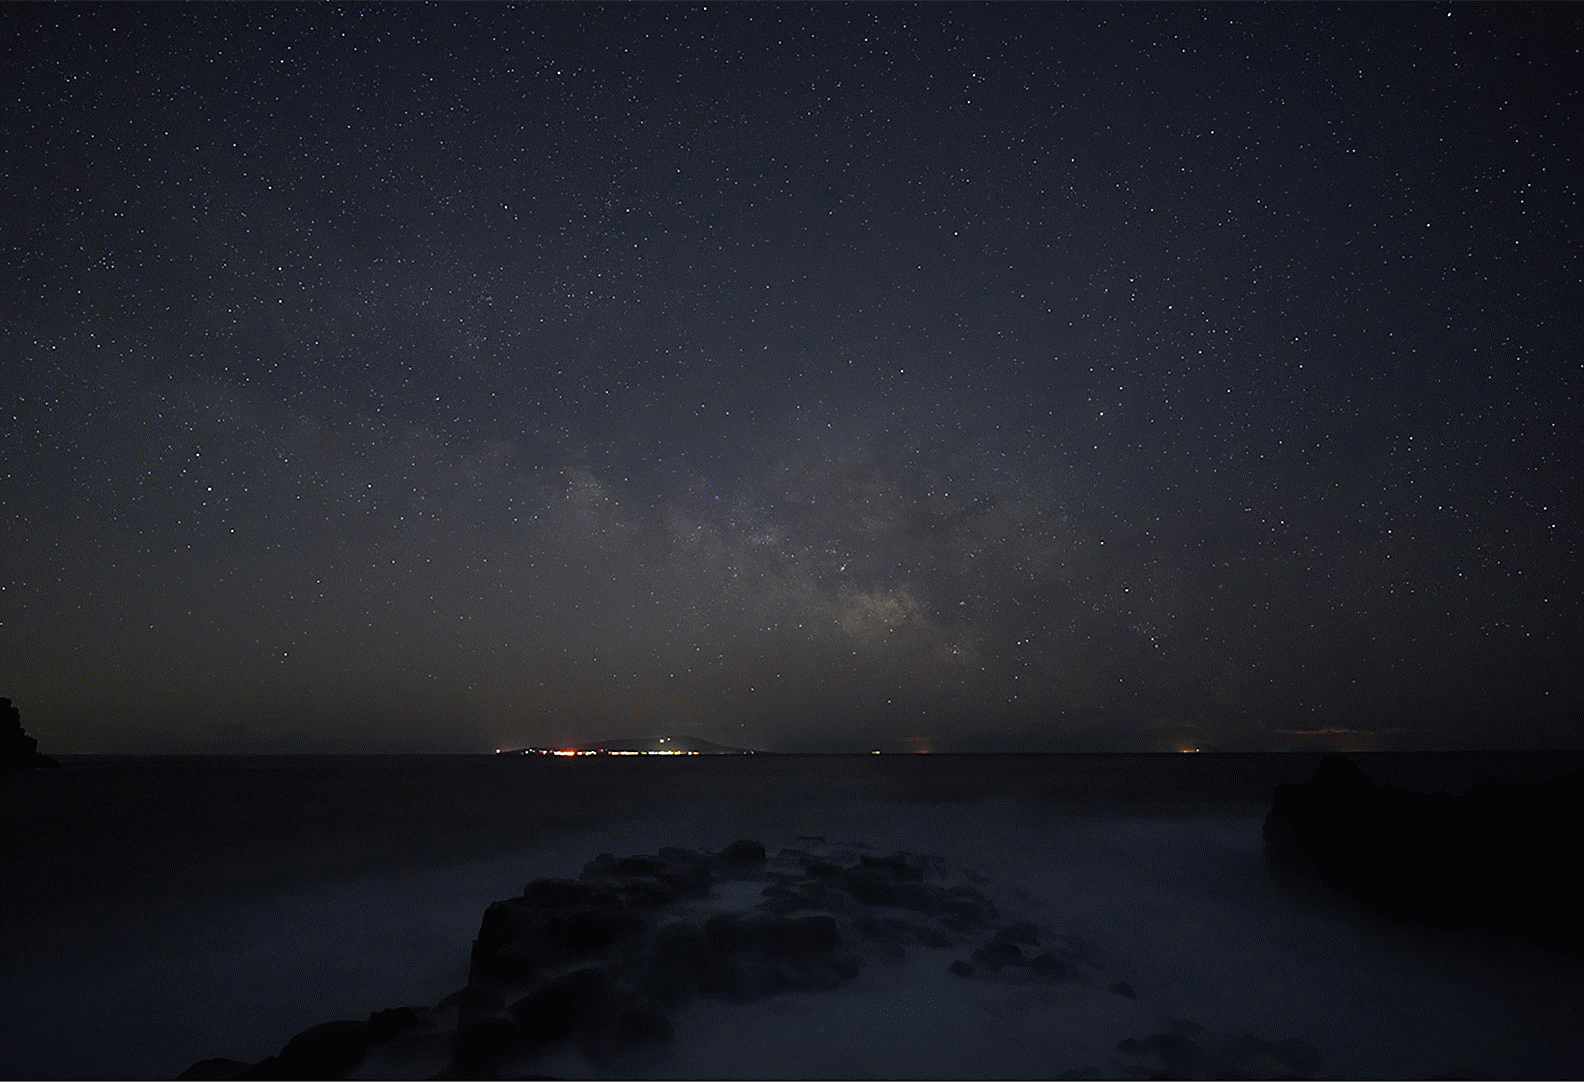 Stargazing photo showing the Milky Way over the sea